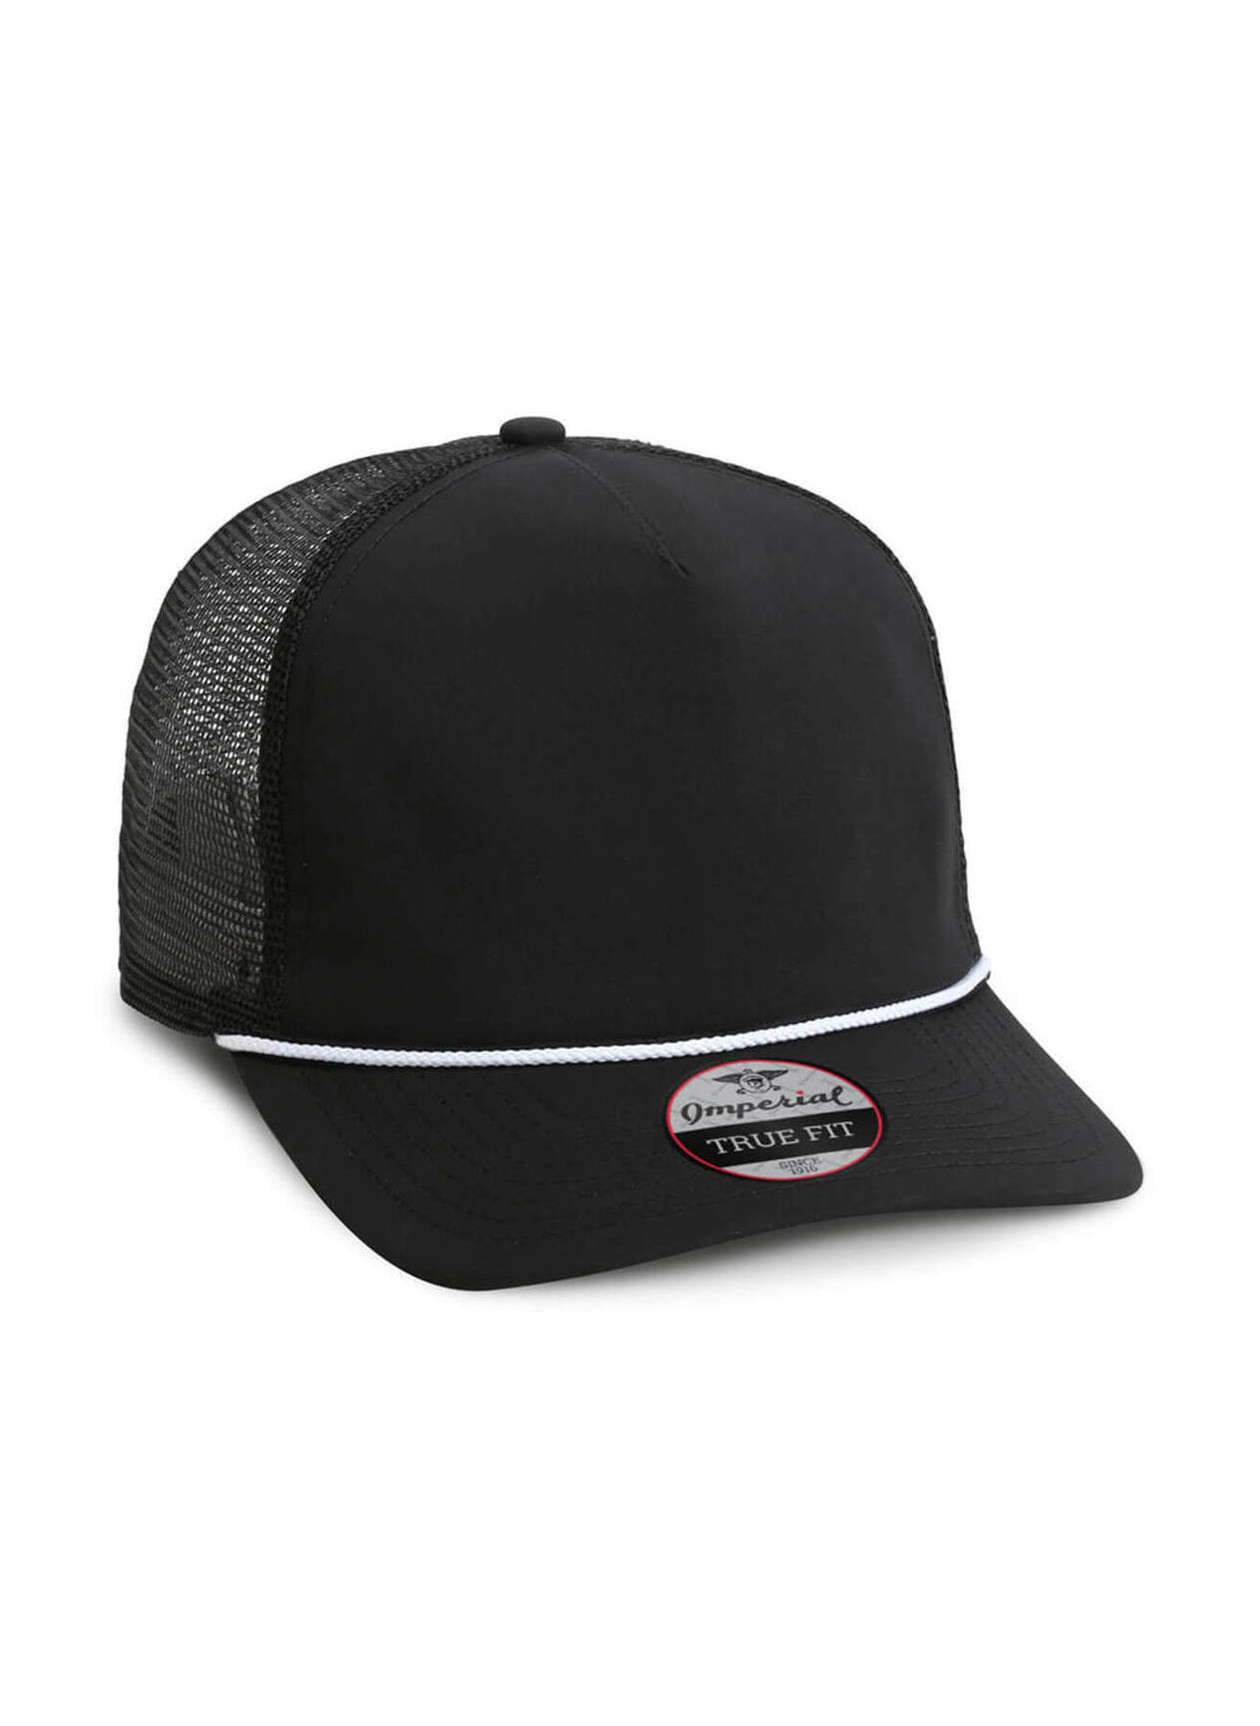 Imperial Black / White Rope The Rabble Rouser Mesh Back Performance Rope Hat